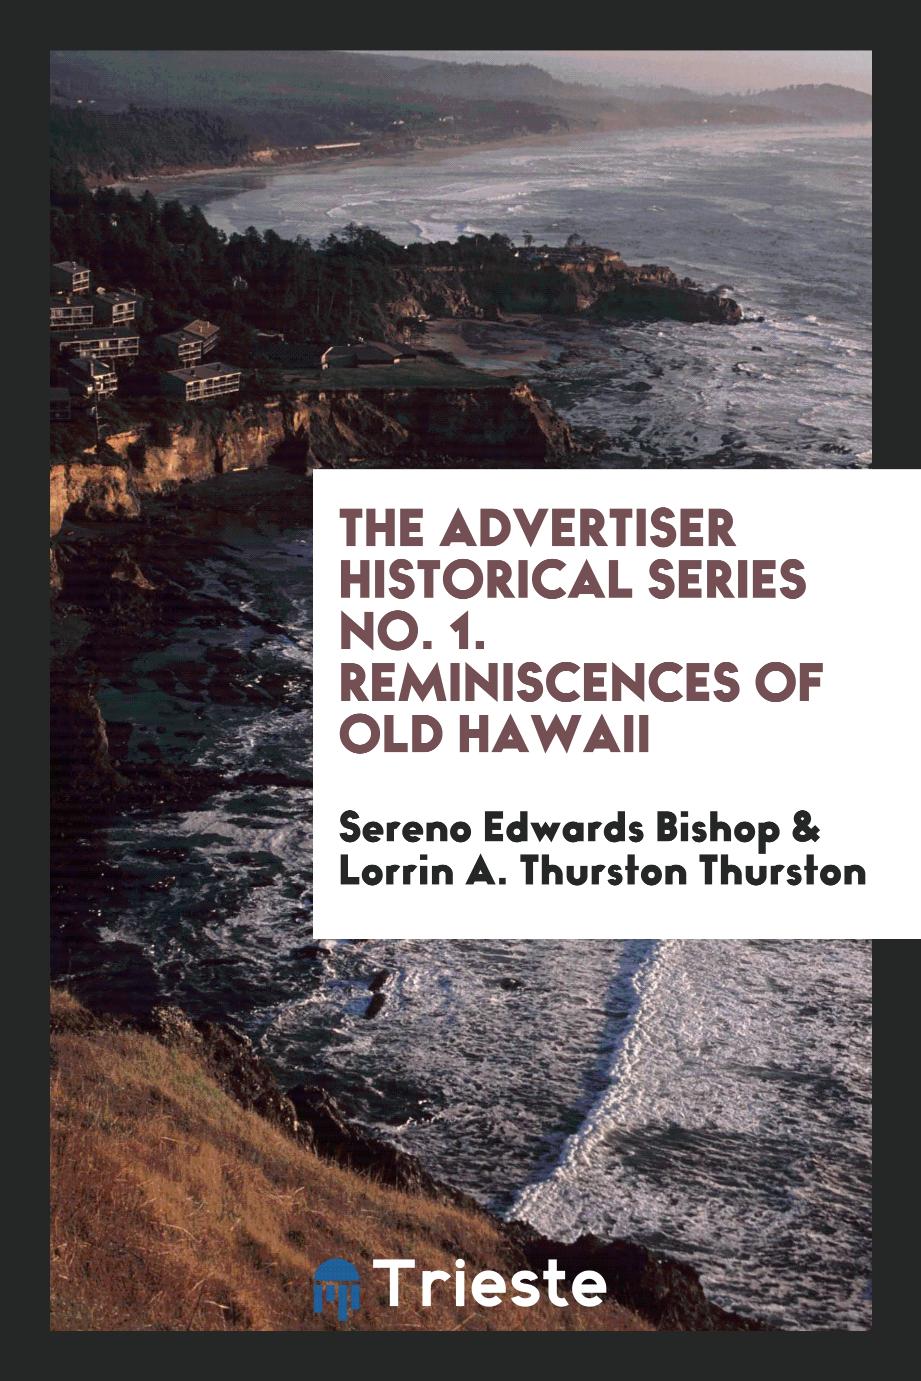 The Advertiser Historical Series No. 1. Reminiscences of Old Hawaii